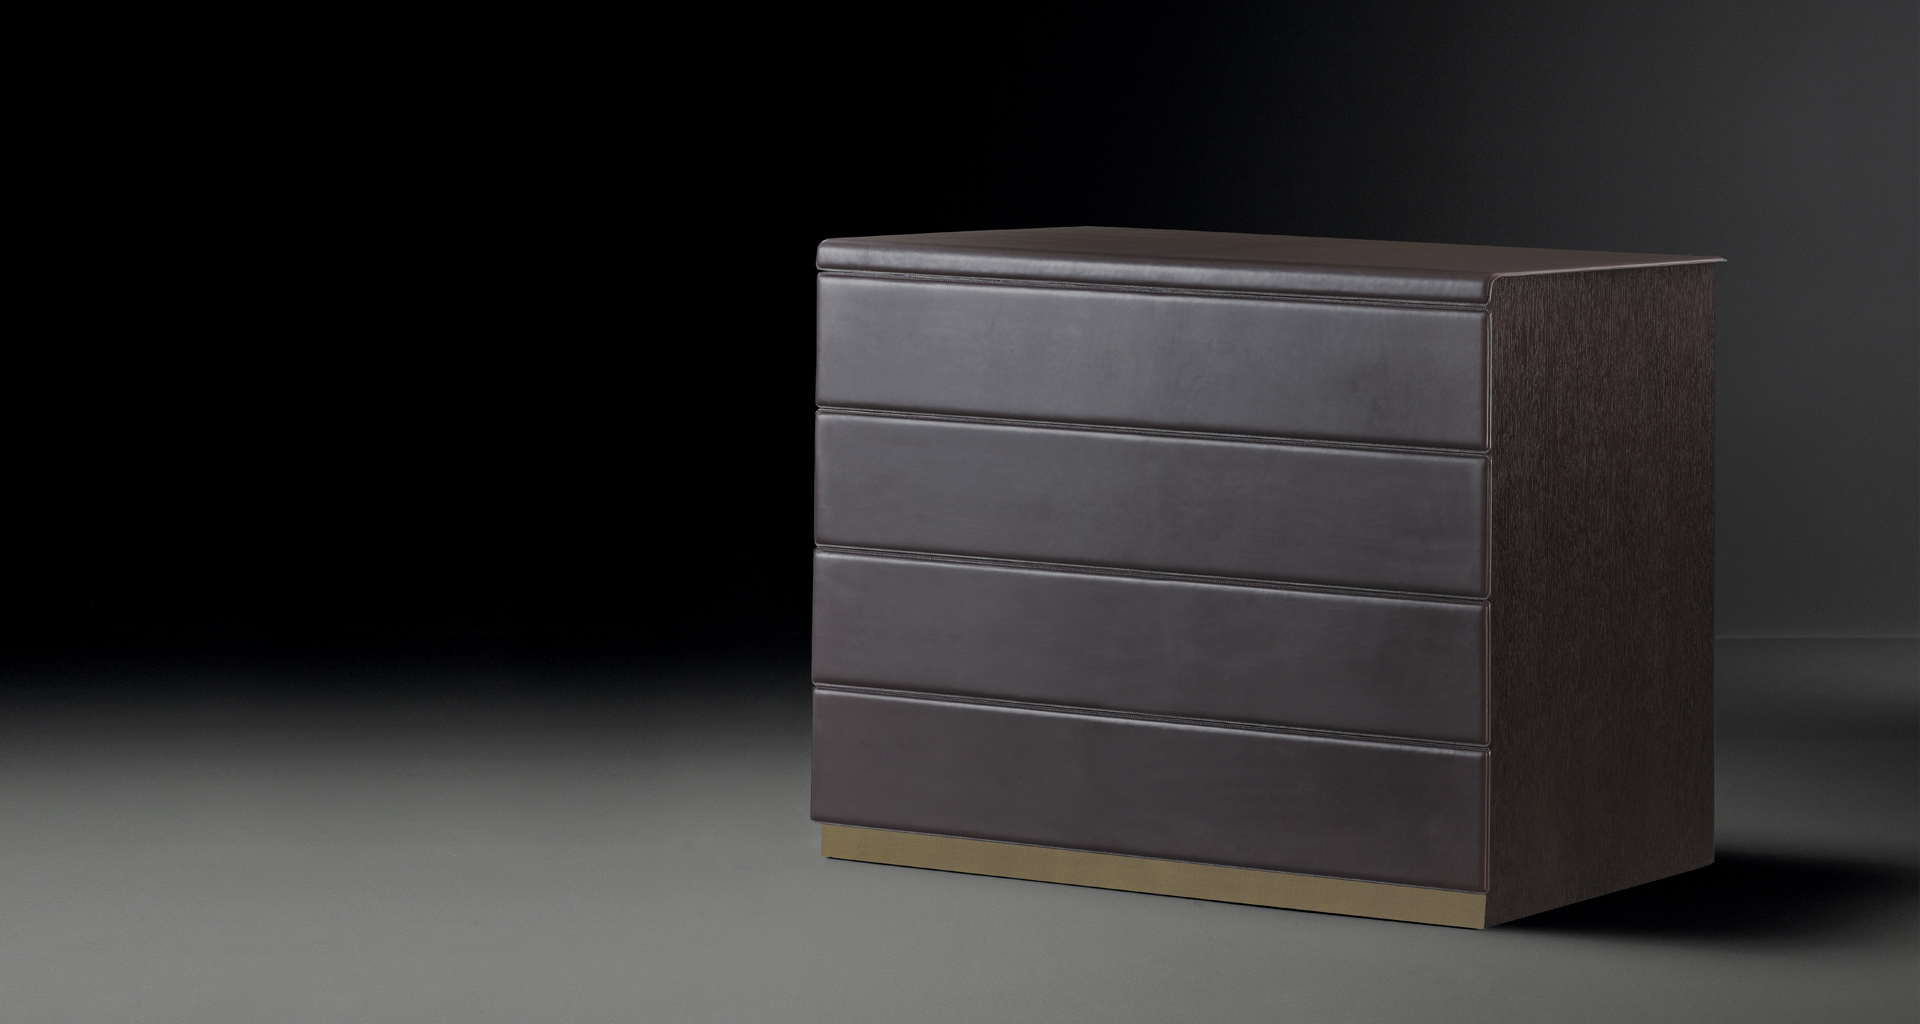 Orione is a wooden chest of drawers covered in leather, from Promemoria's catalogue | Promemoria